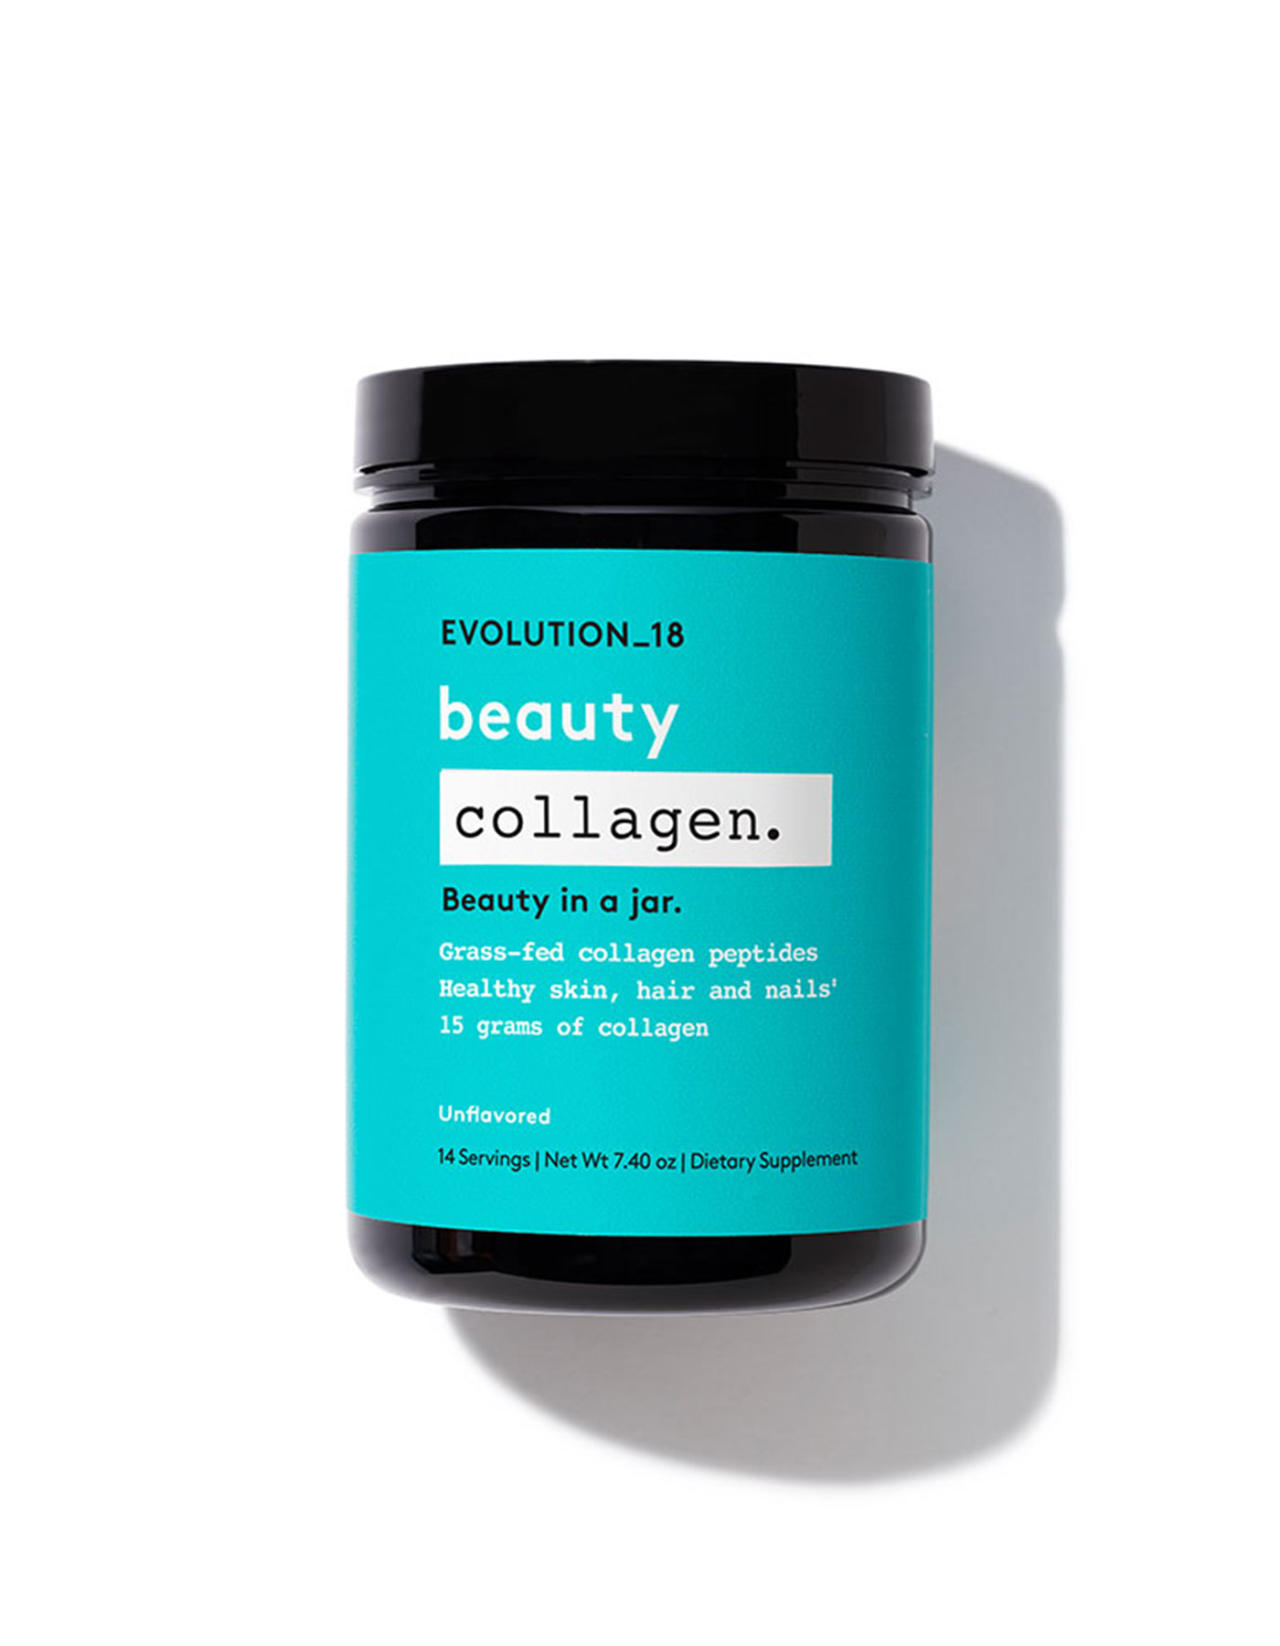 justbobbi_Diary_MD_BeautyCollagen